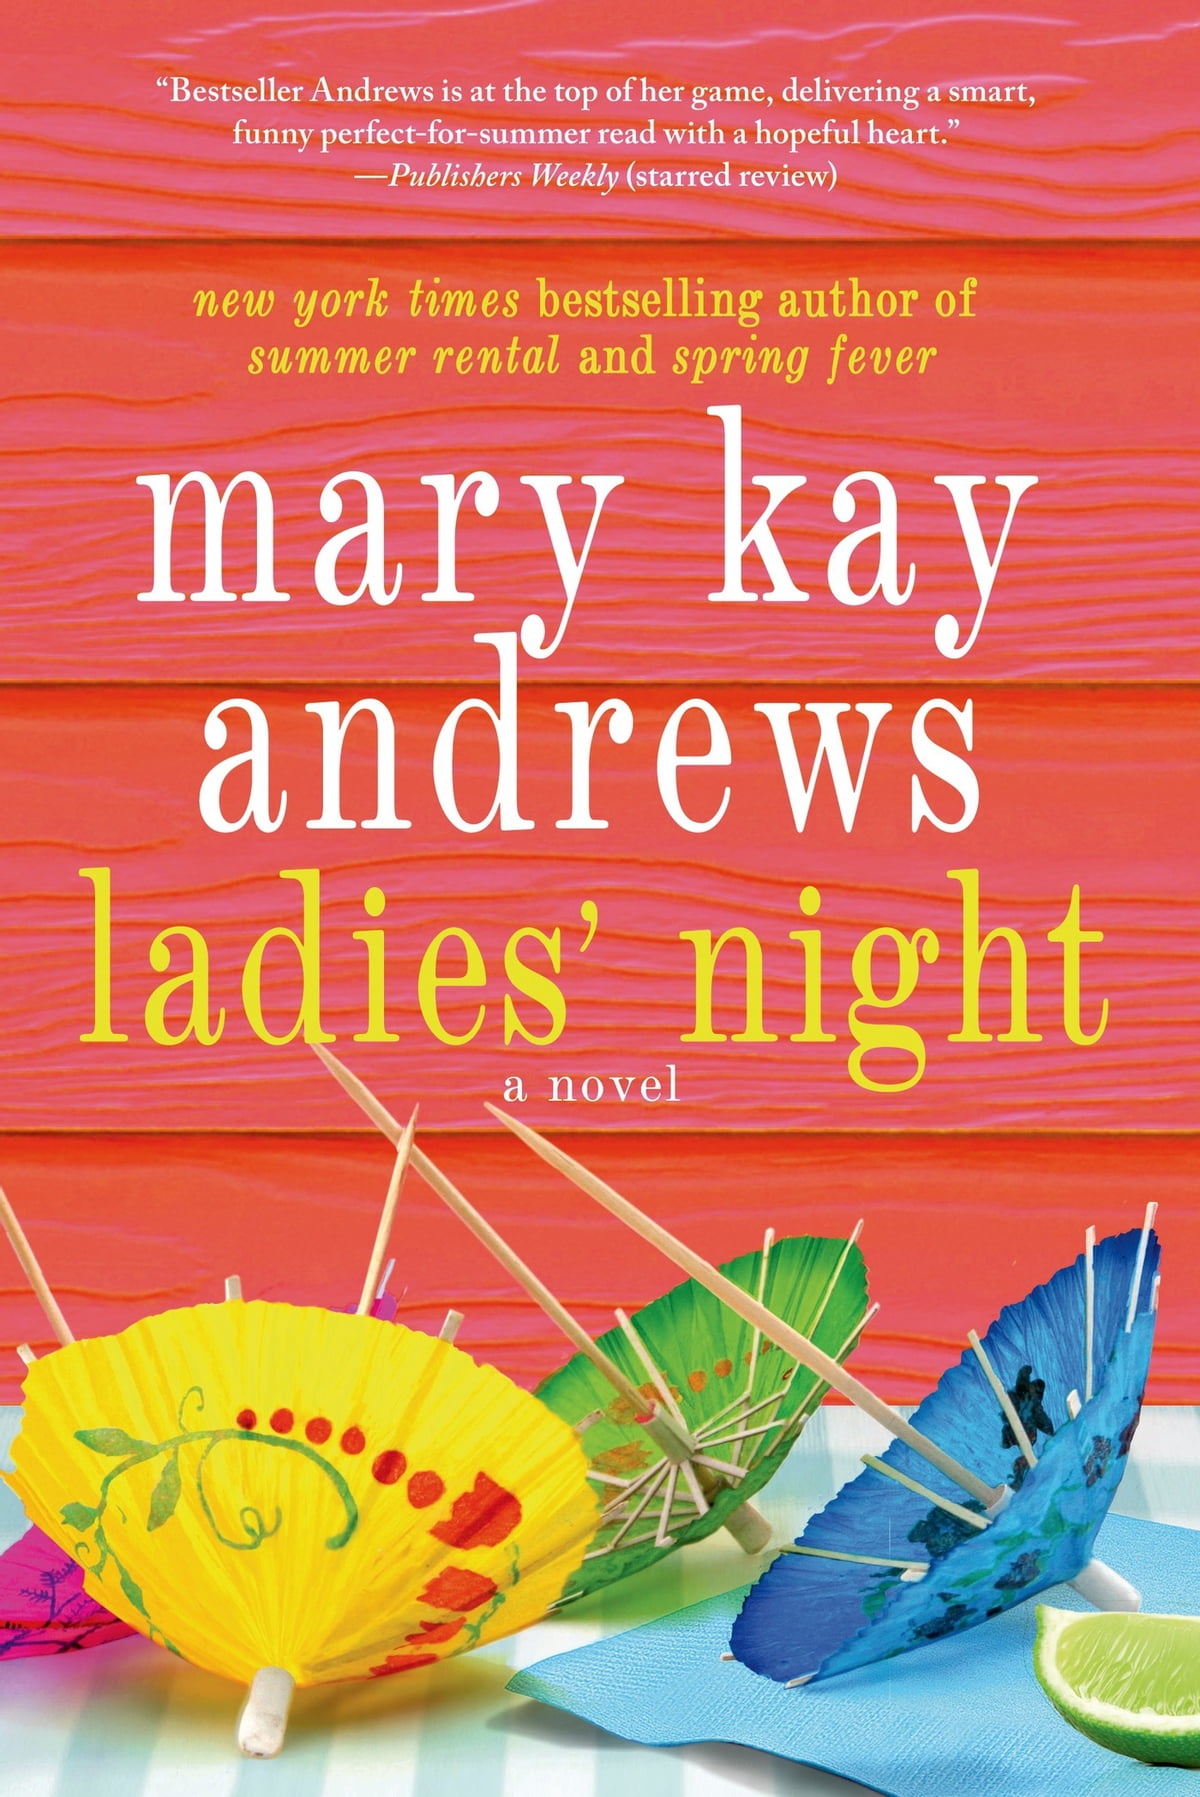 Ladies’ Night by Mary Kay Andrews